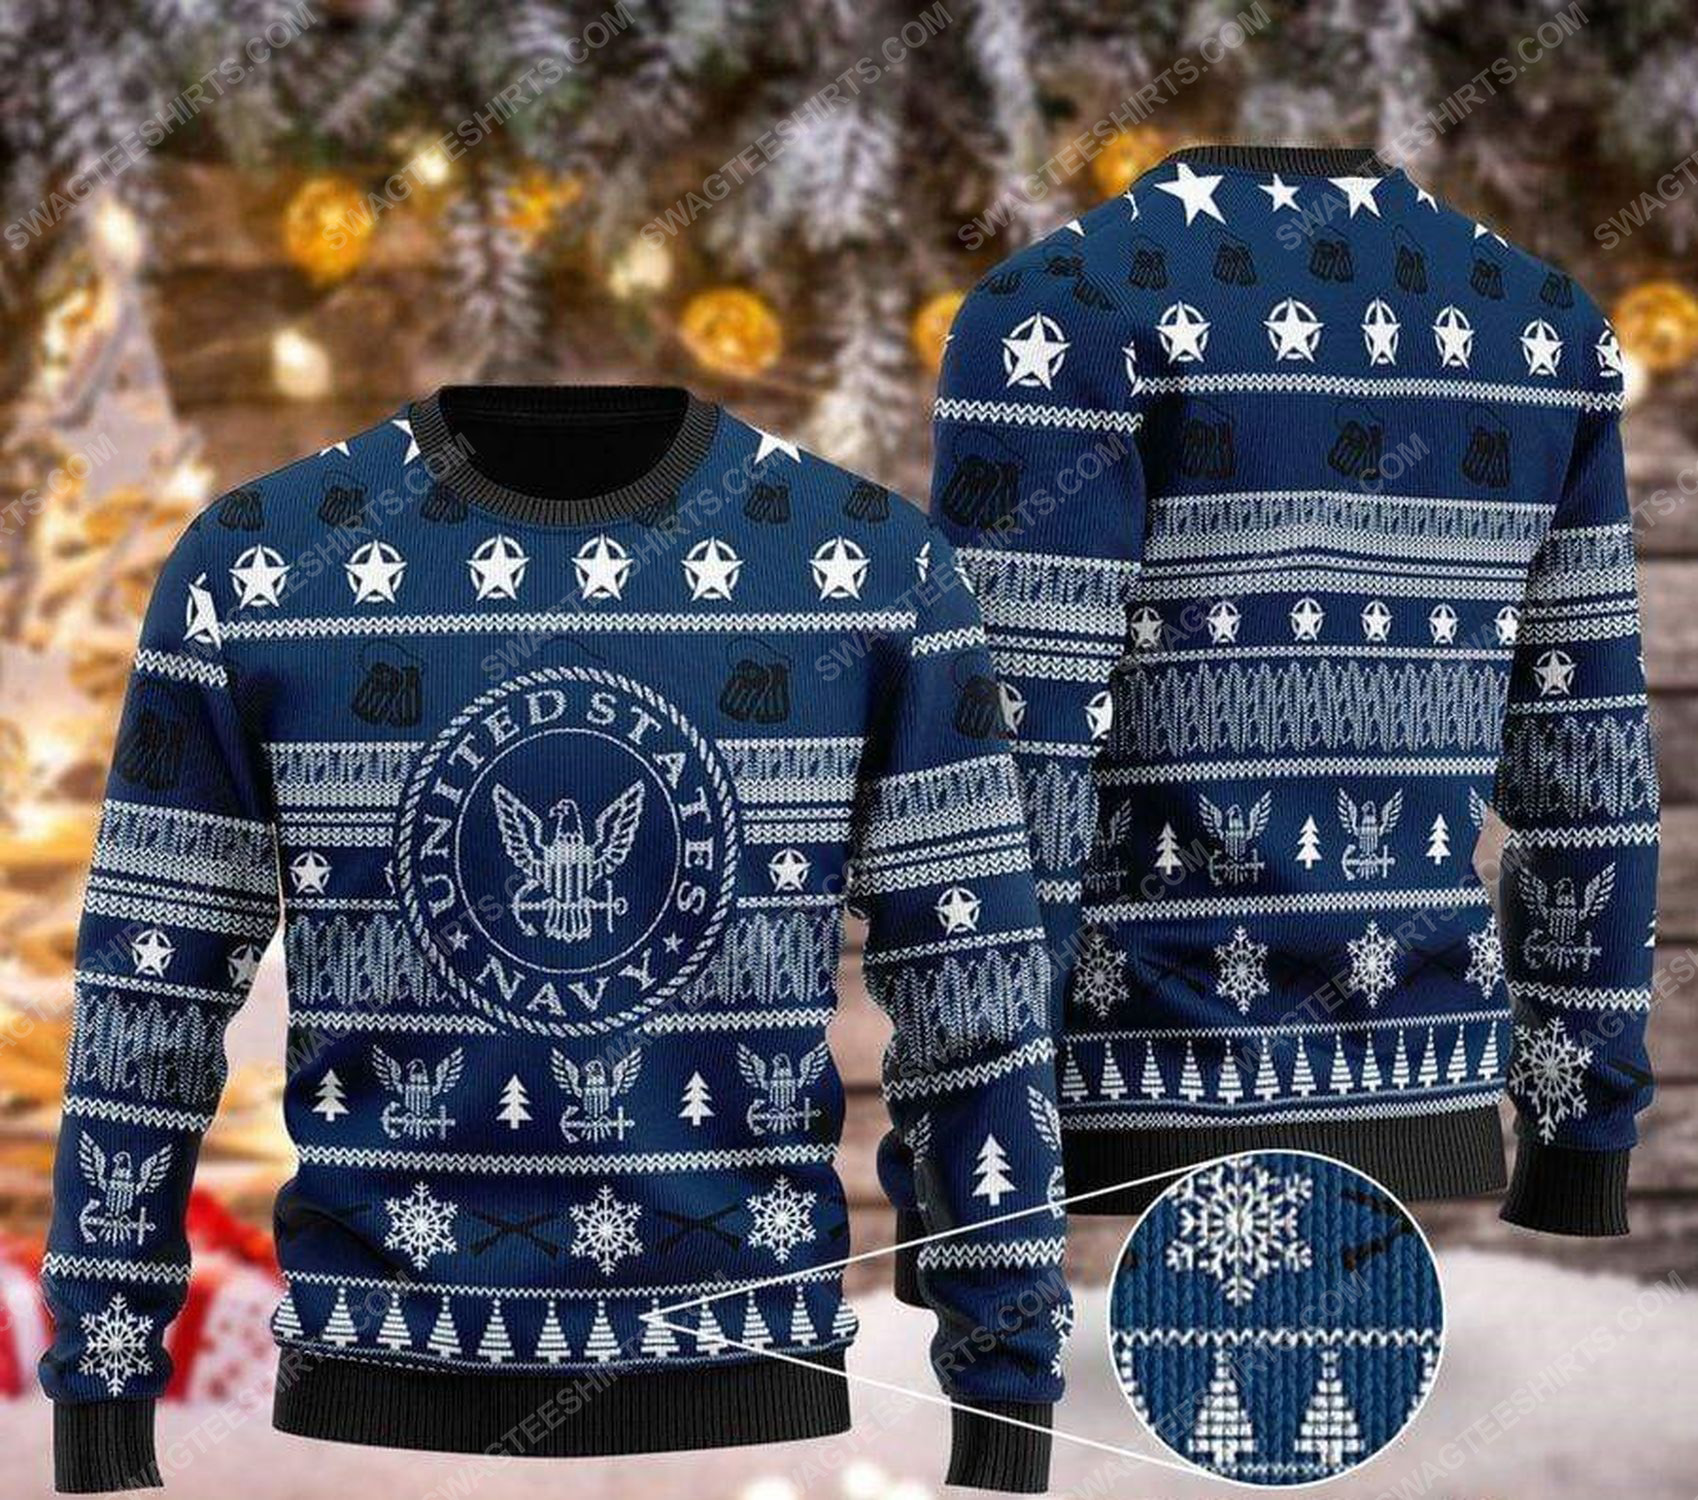 United states navy pattern ugly christmas sweater 1